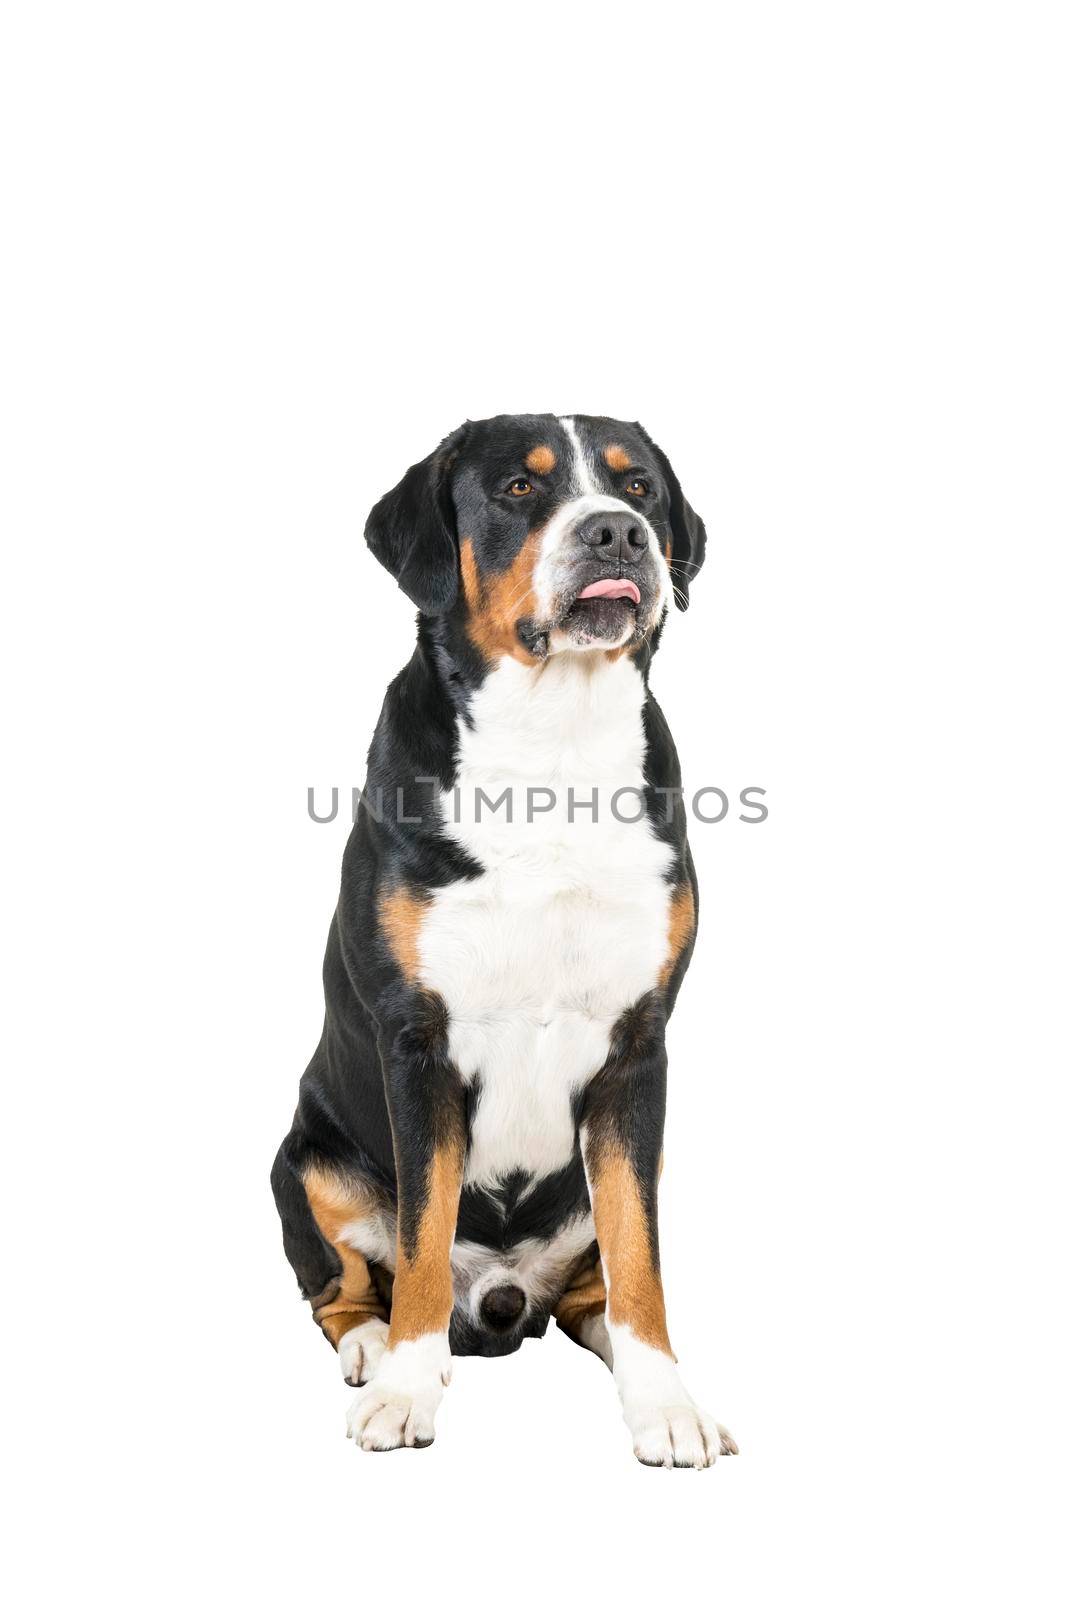 A Greater Swiss Mountain Dog sitting and looking up to the camera